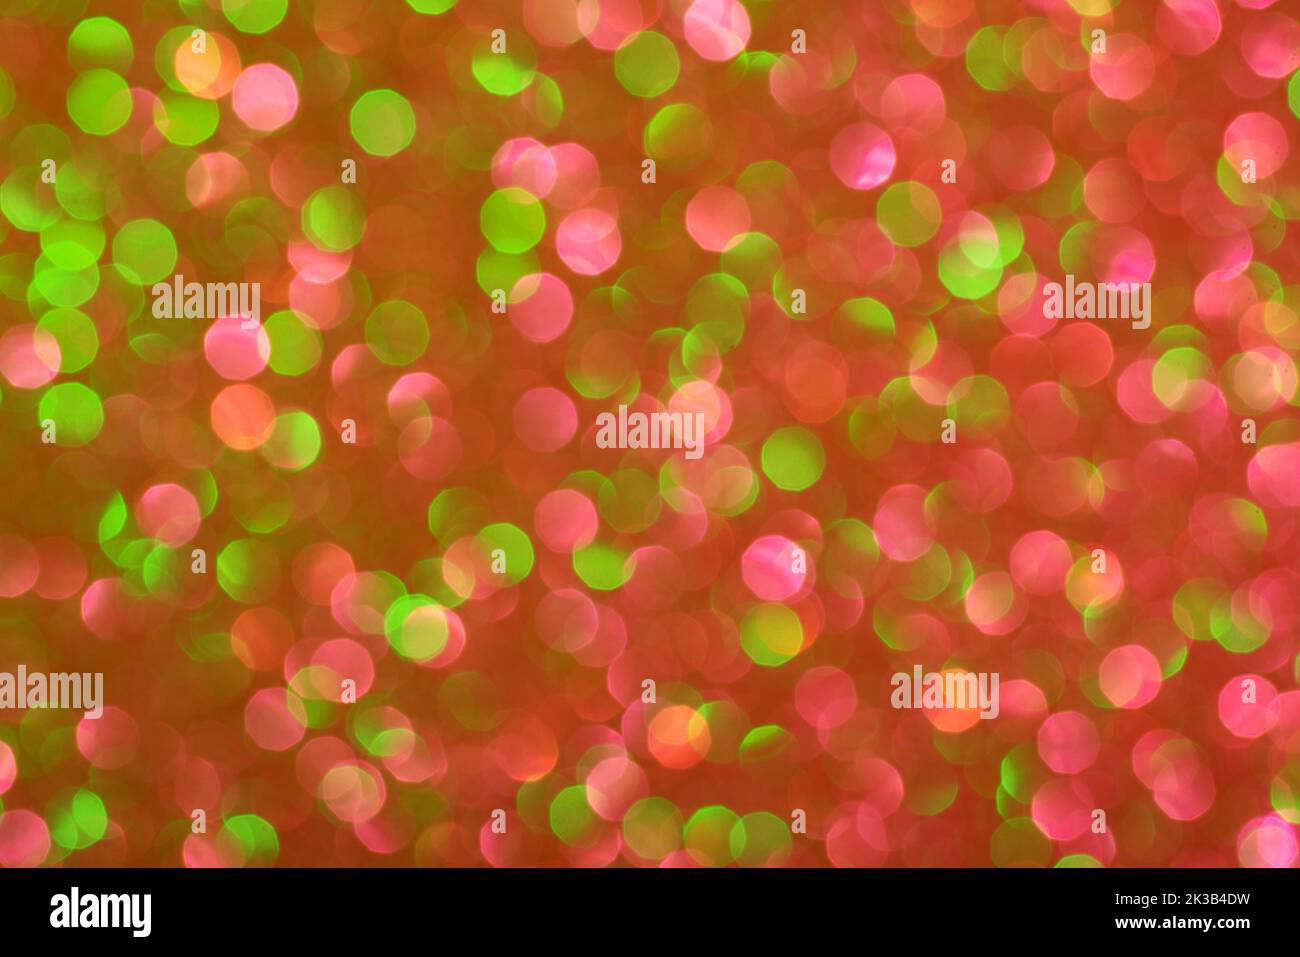 Festive abstract color bokeh background Stock Photo